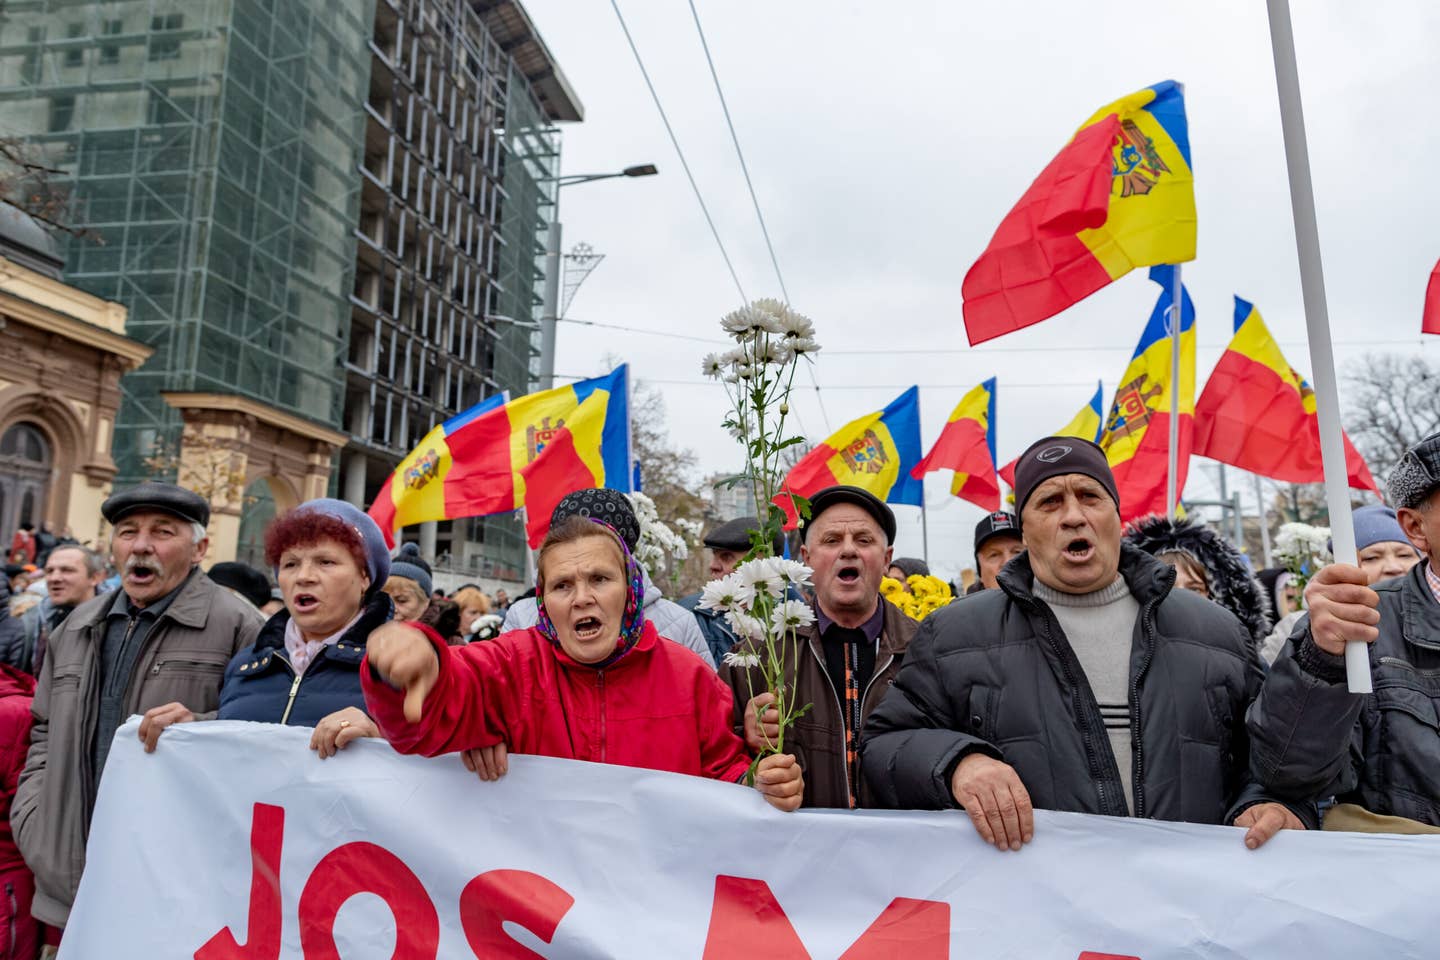 Protesters calling upon Moldova’s pro-Western leaders to leave the office during a march in the capital, Chisinau, on November 13, 2022. <em>Photo by Vudi Xhymshiti/Anadolu Agency via Getty Images</em>